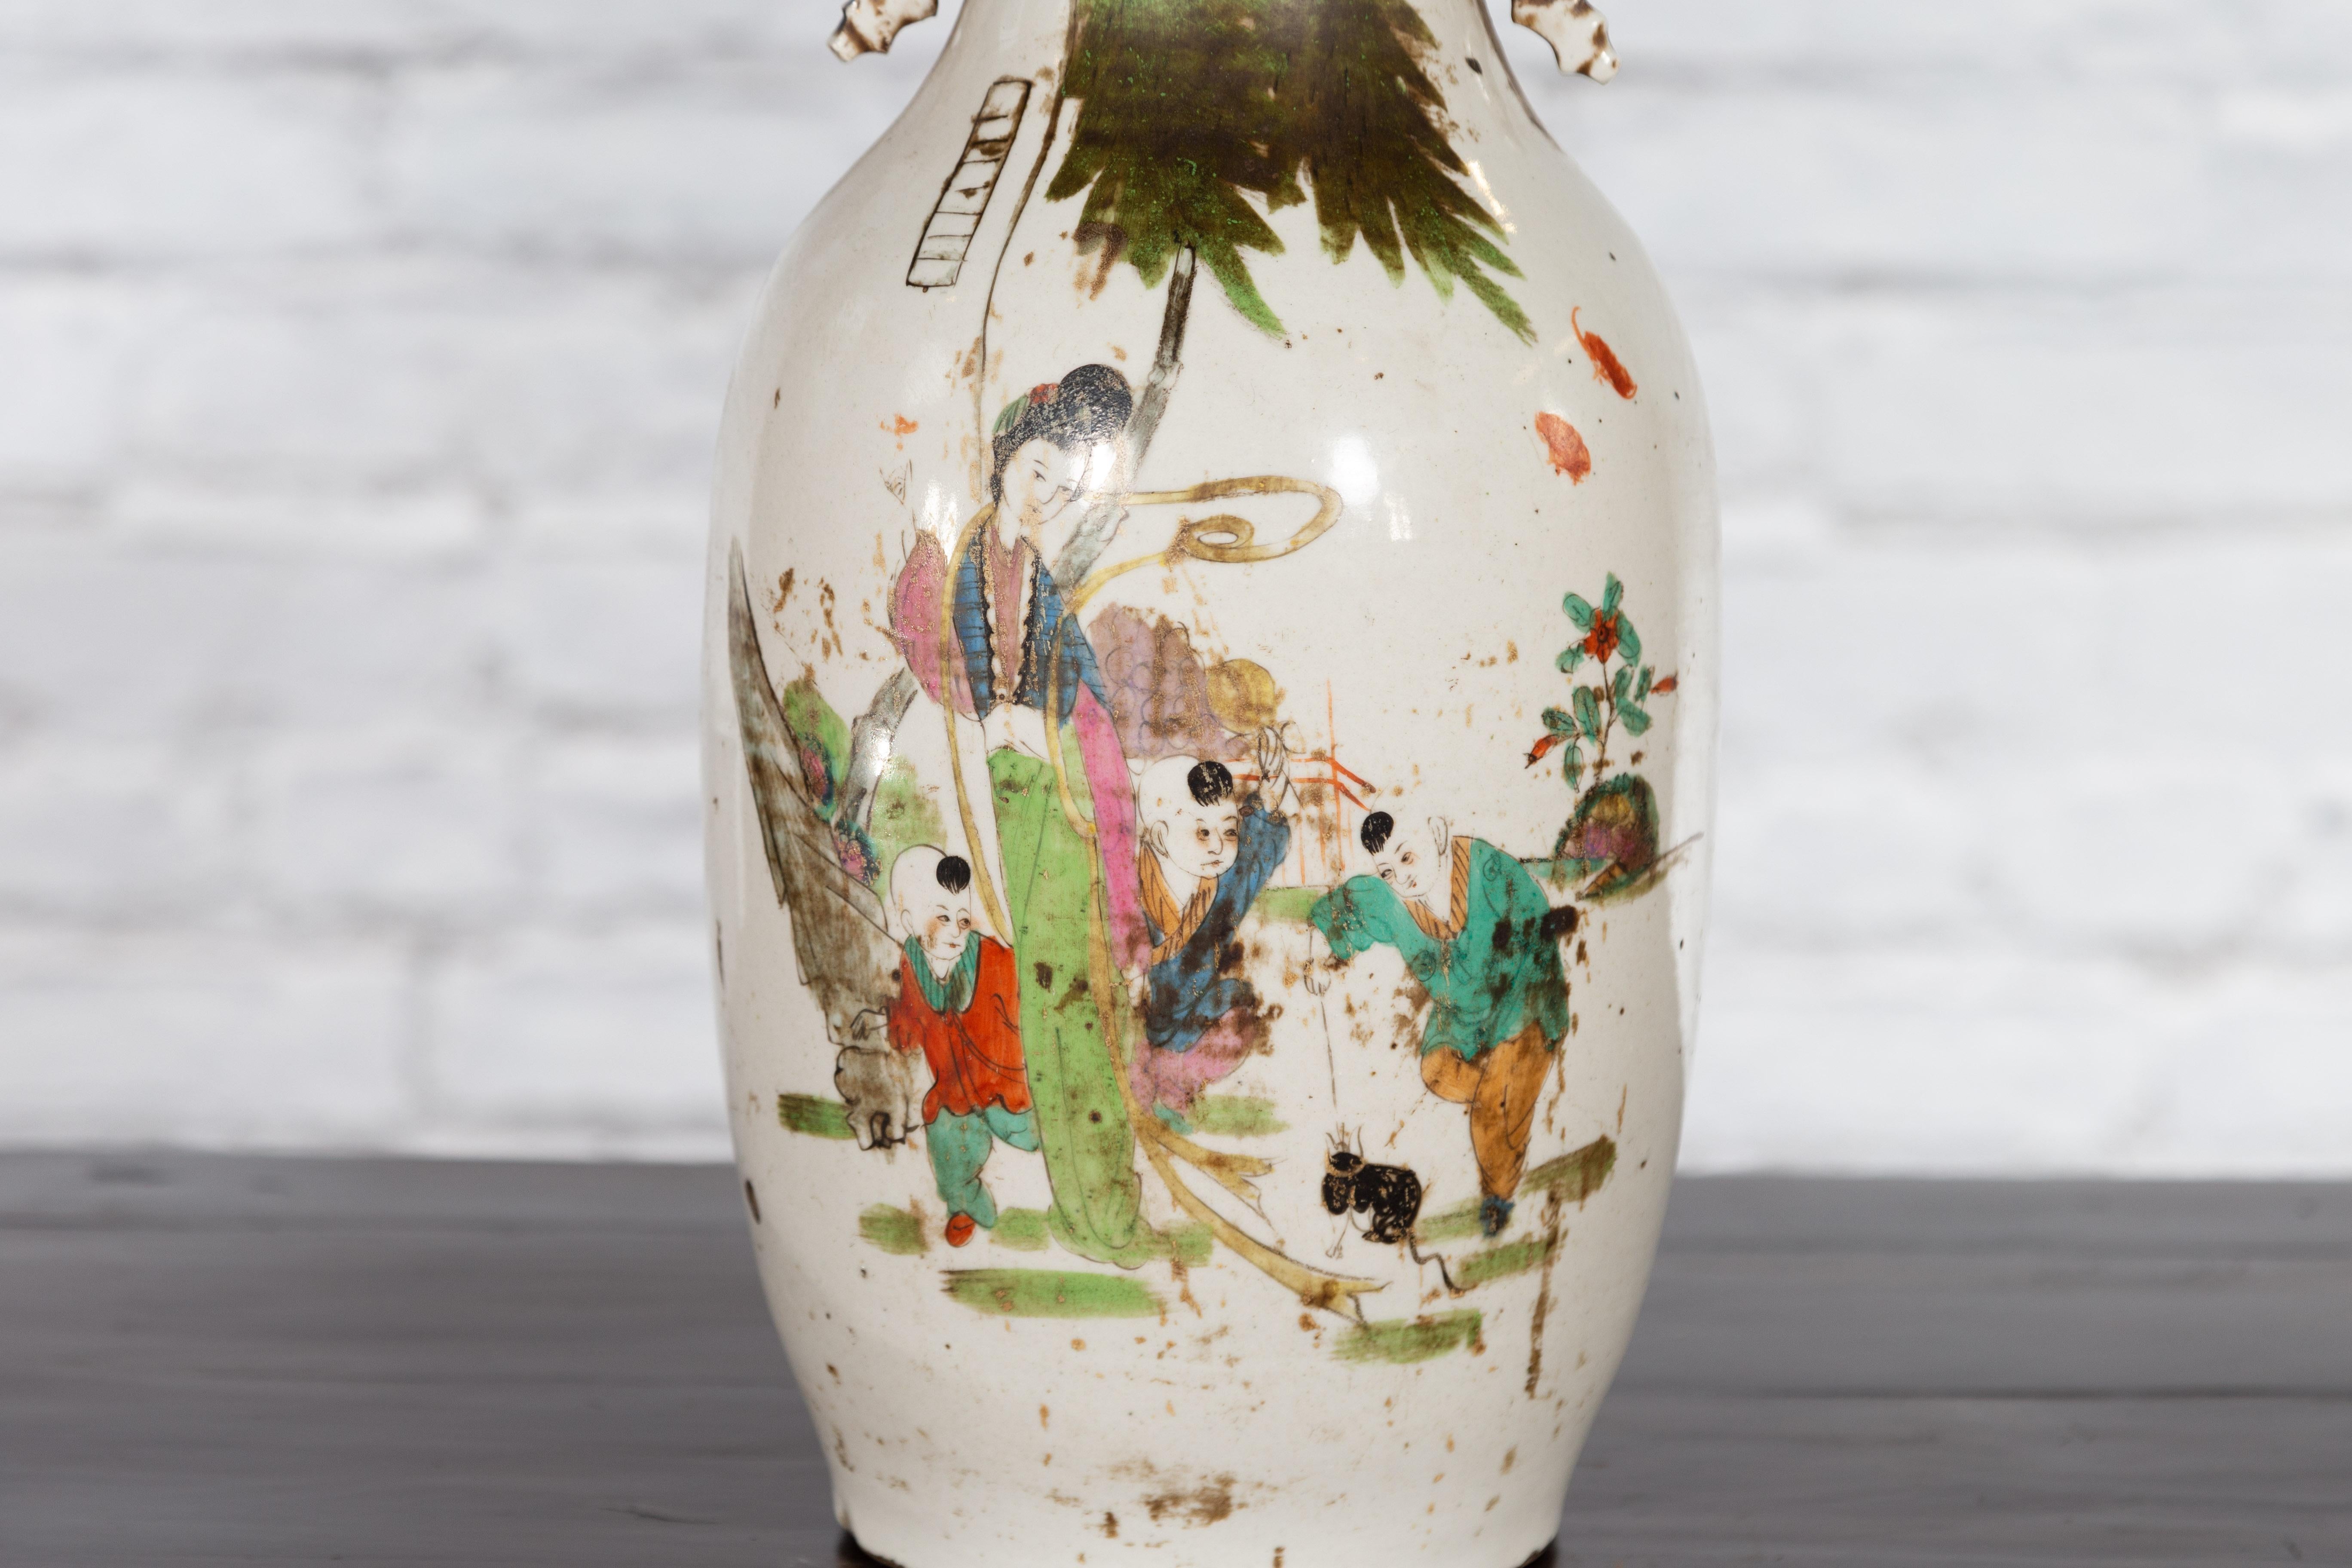 Chinese Porcelain Vase with Hand-Painted Figures and Calligraphy Motifs For Sale 1